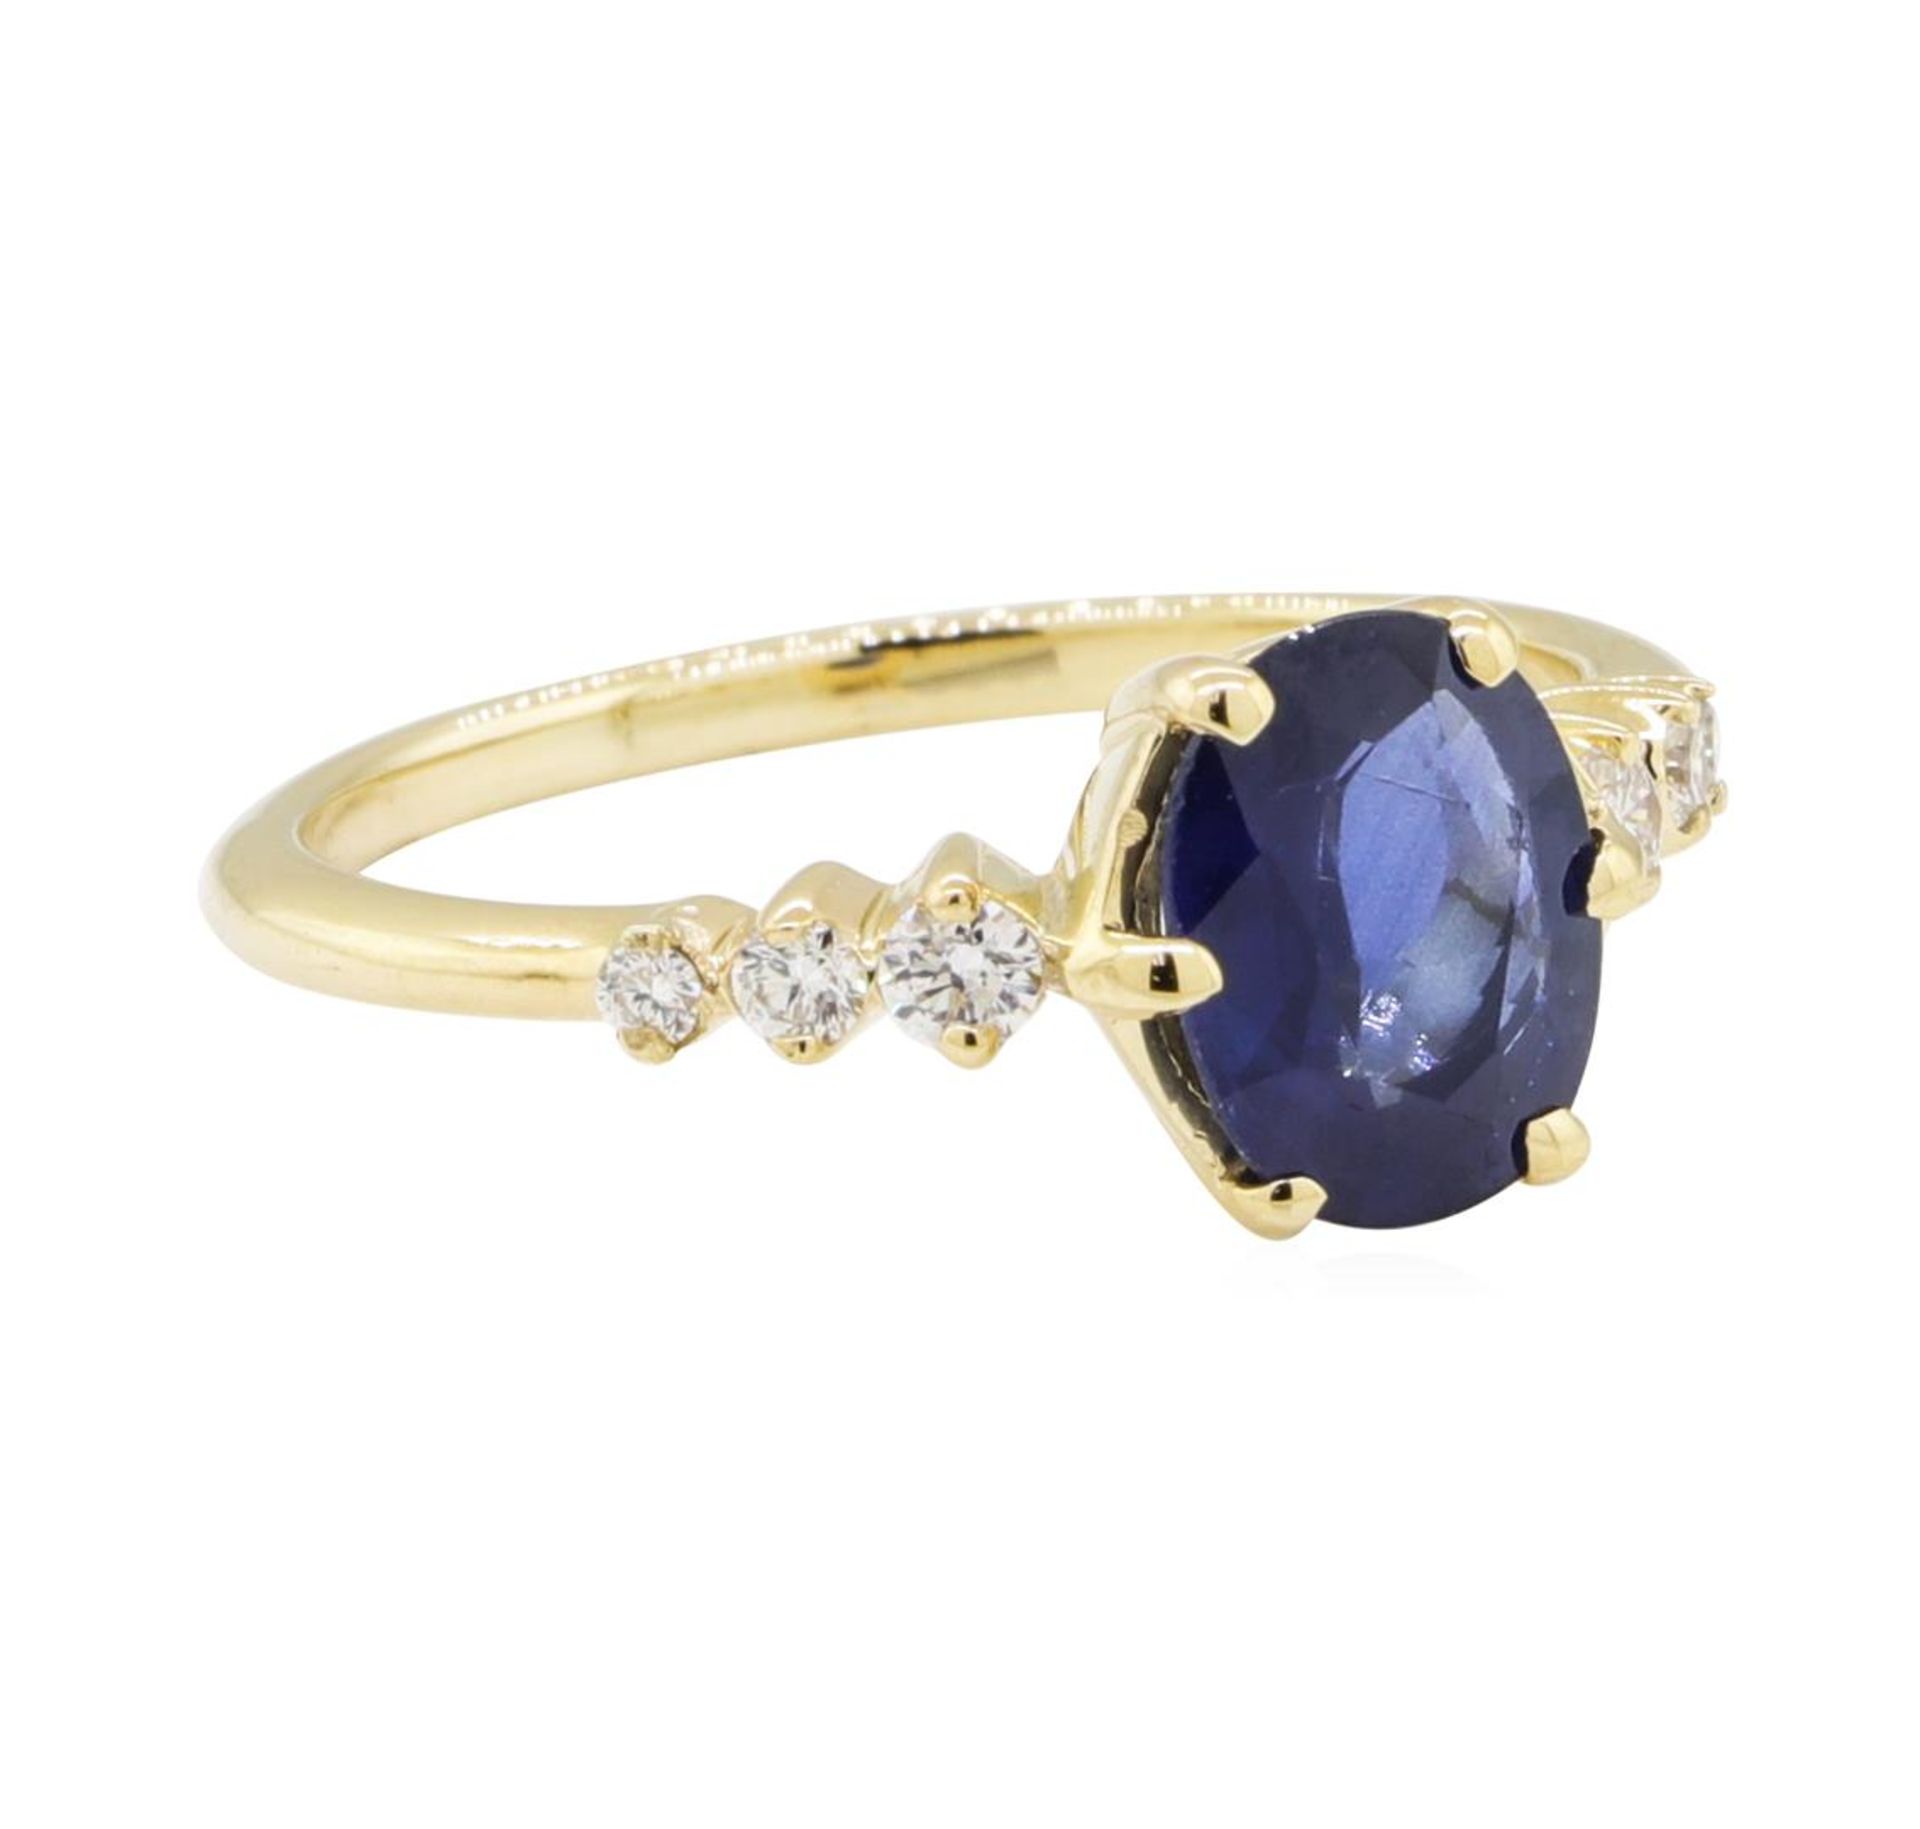 1.43ctw Sapphire and Diamond Ring - 14KT Yellow Gold